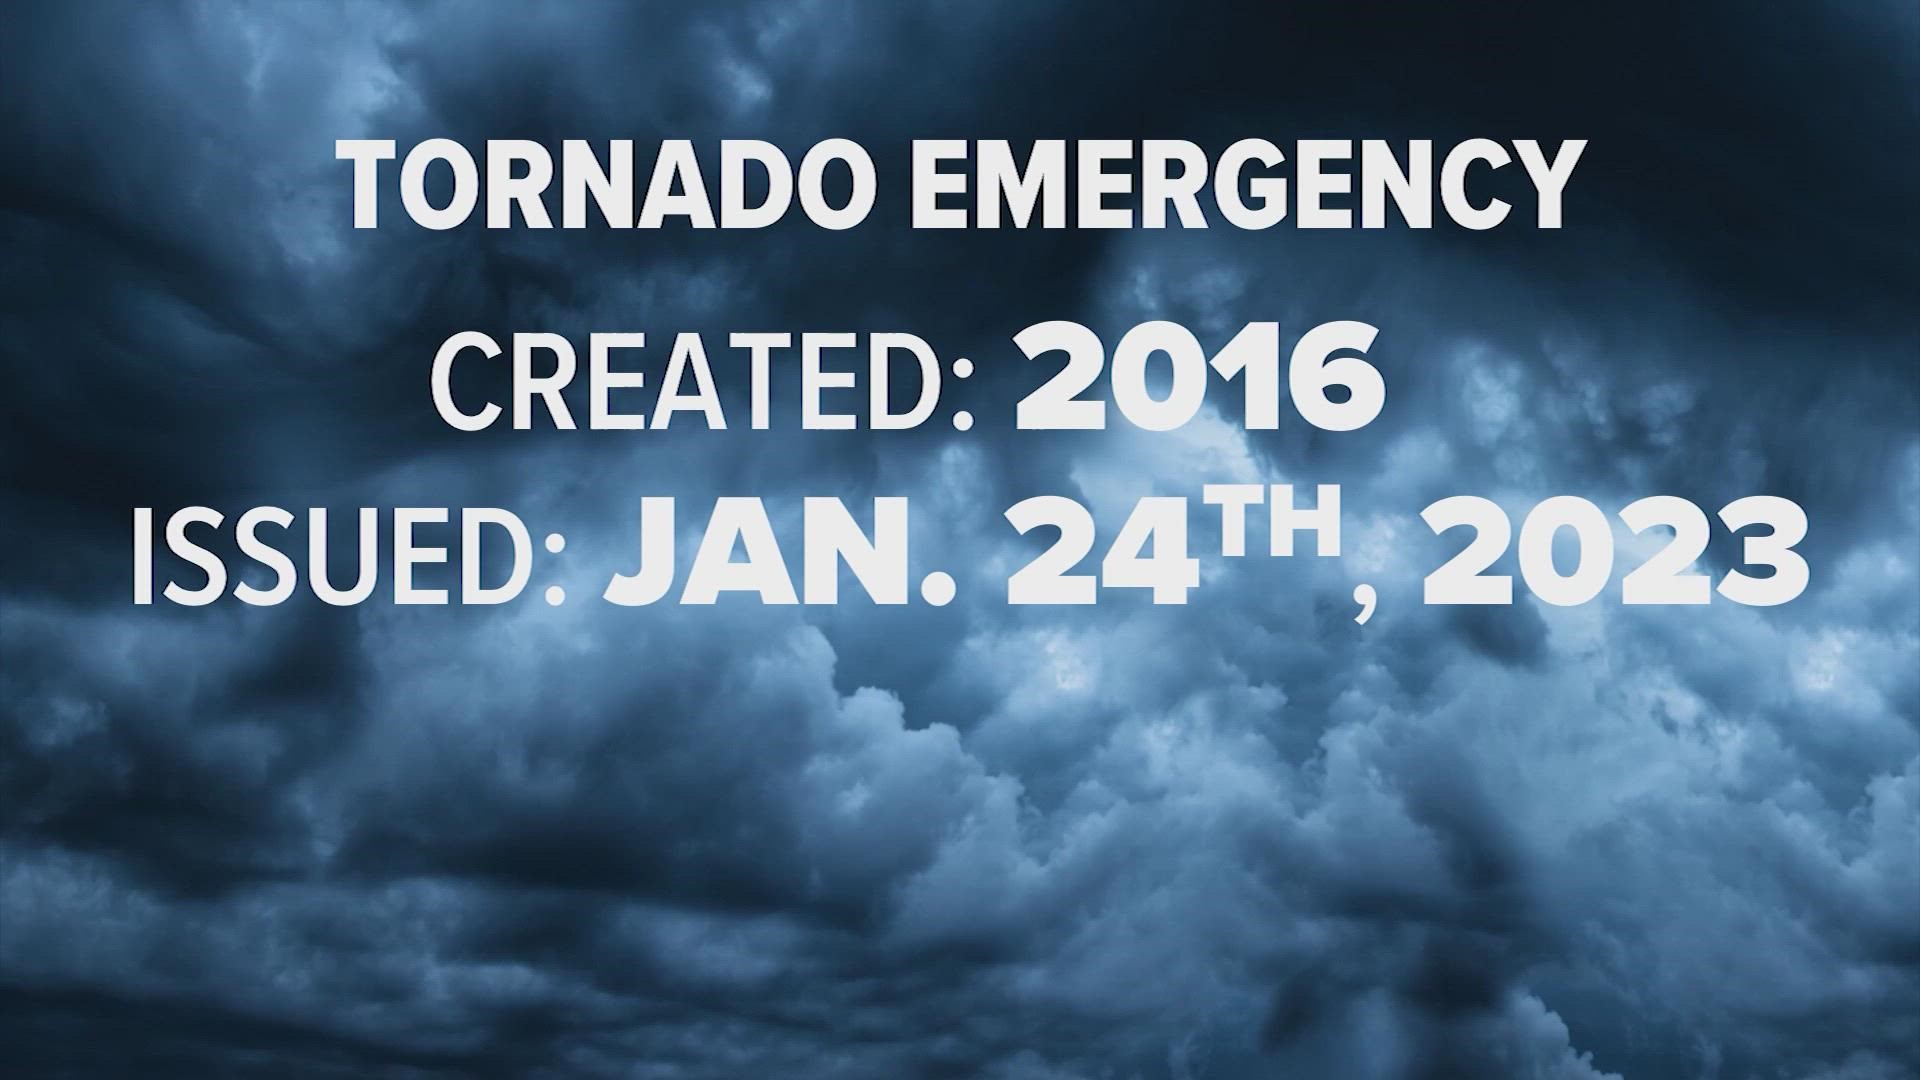 A Tornado Emergency has been available as an alert from the NWS in Houston for seven years but Tuesday, Jan. 24 was the first time it was used.